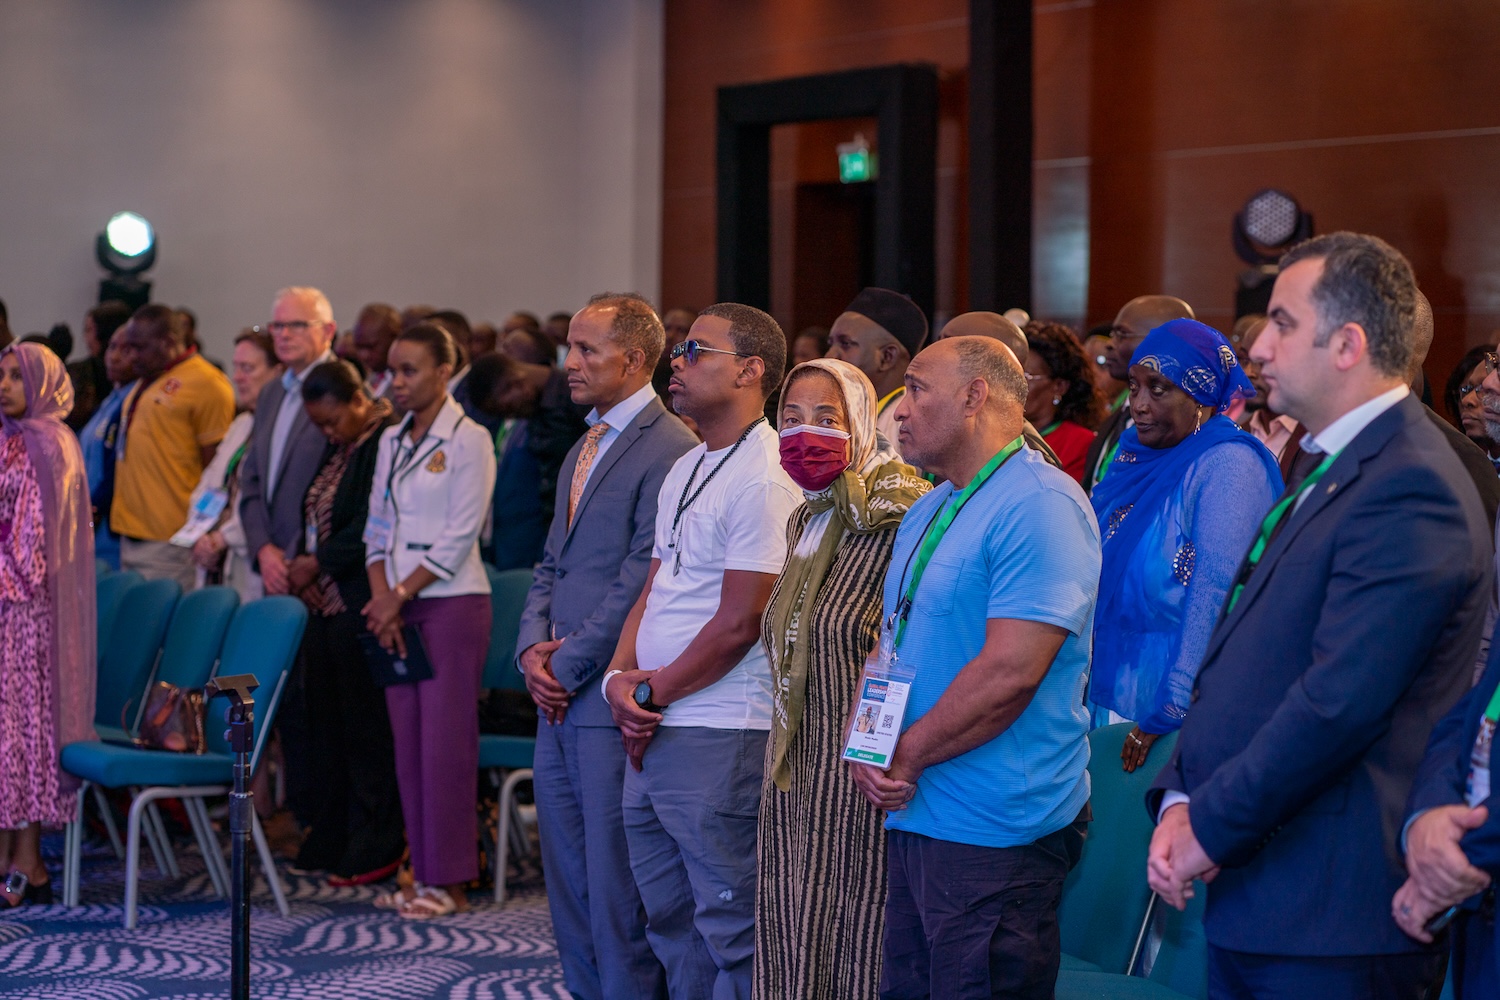 A diverse group of people, standing in rows, attends a formal event in a conference room during GPLC Africa in Kenya. Some individuals are dressed in traditional attire while others wear business or casual clothing, united by a shared moment of prayer.